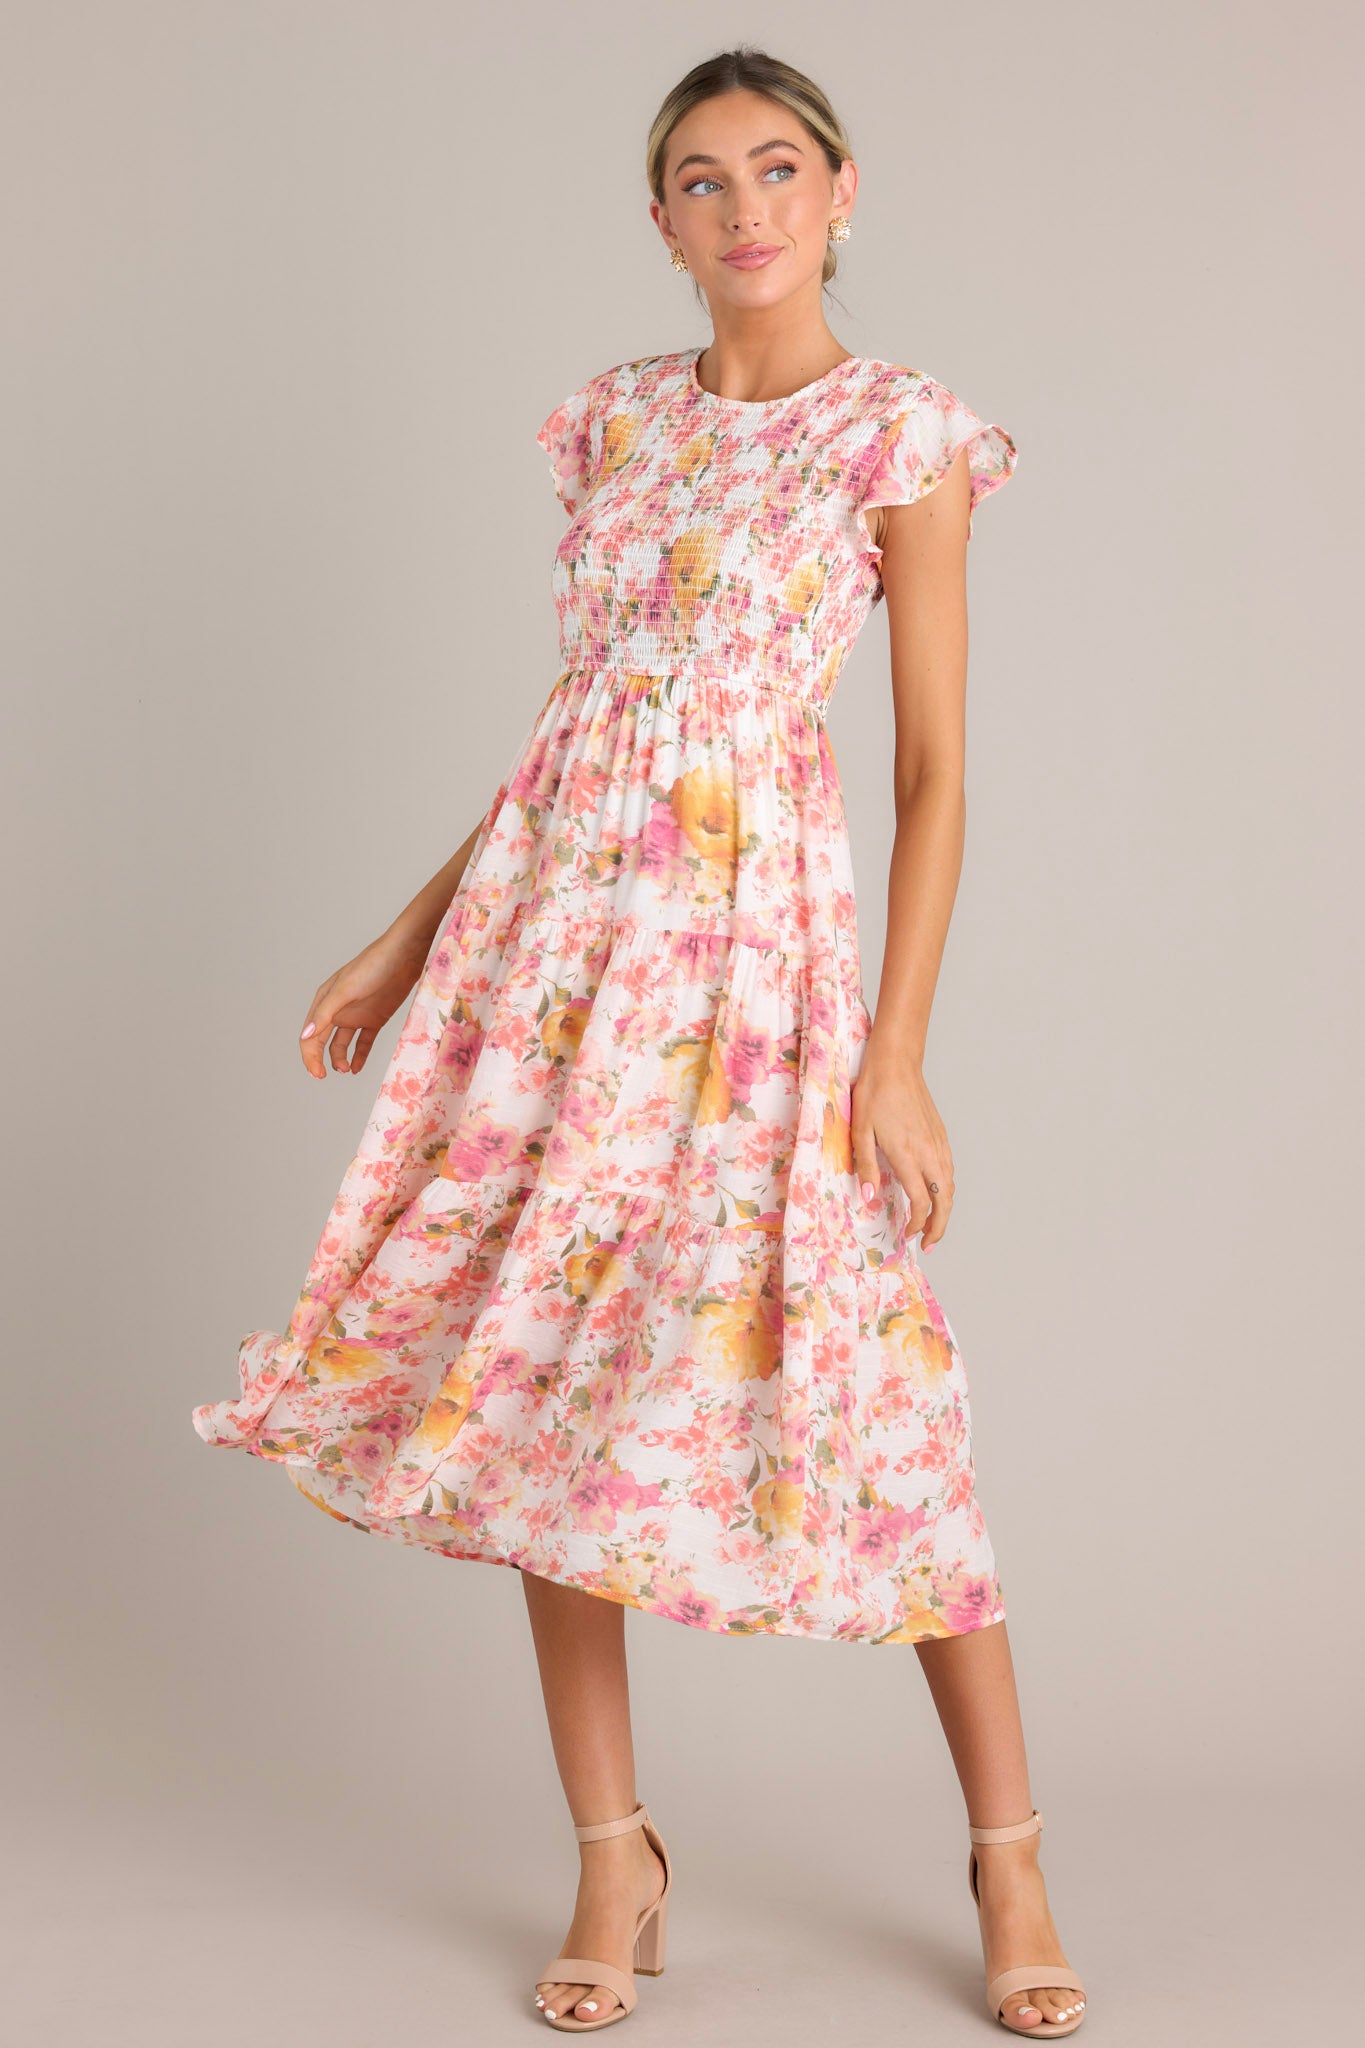 Floral midi dress in pink with a high neckline, flutter sleeves, smocked bodice, tiered structure, and floral print.